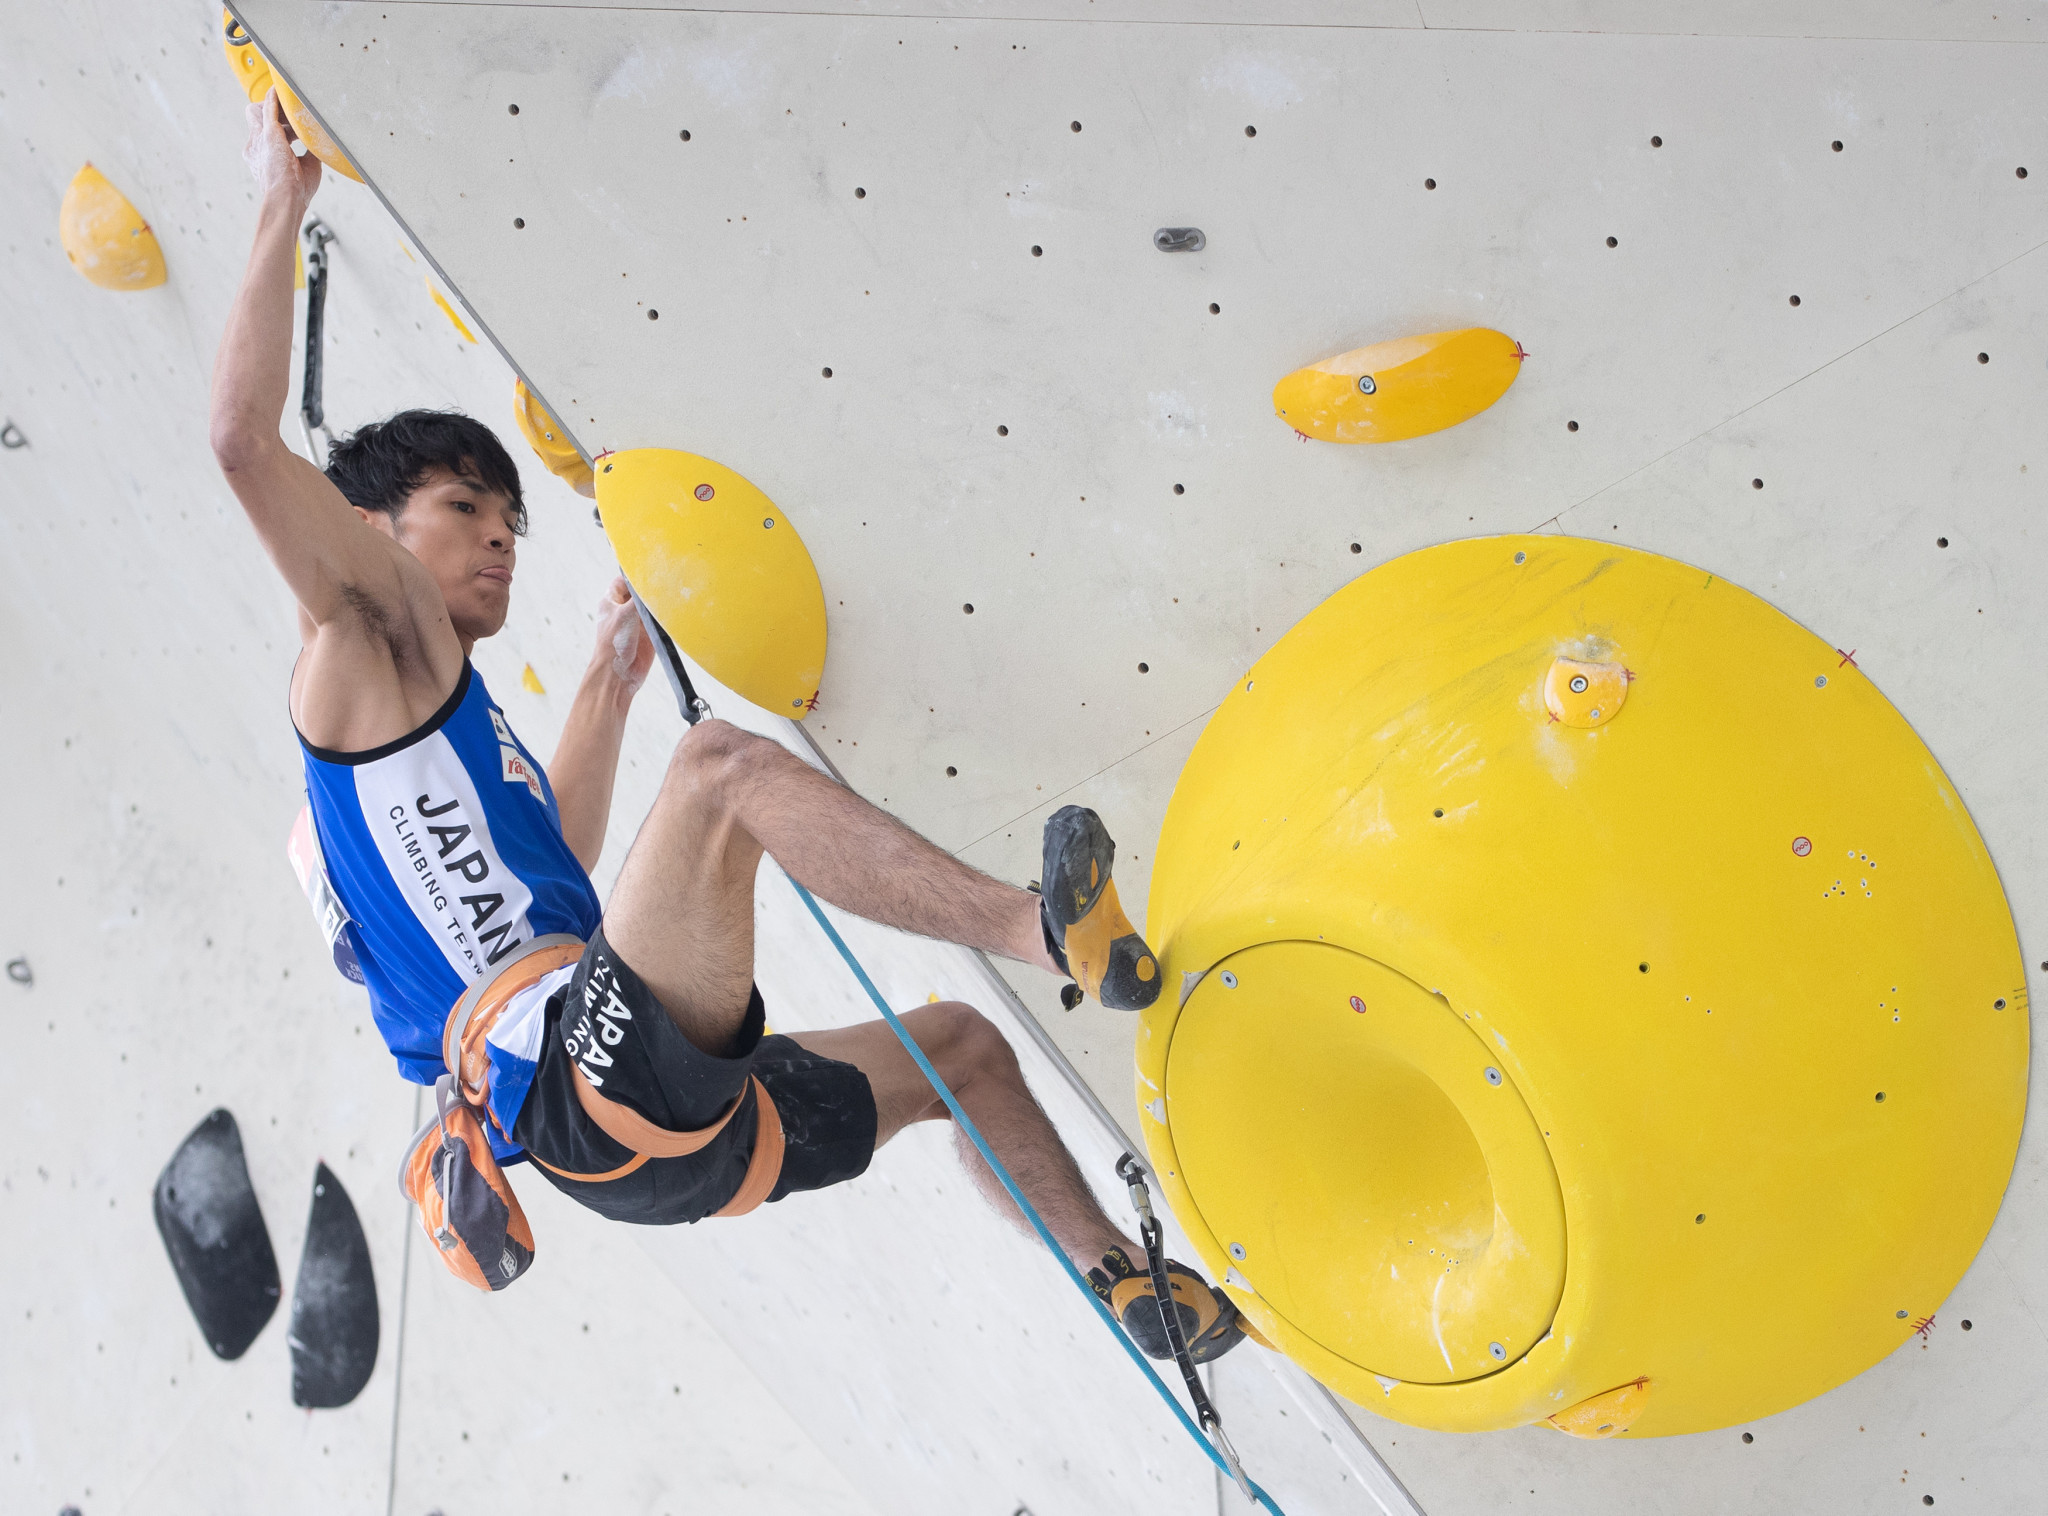 Hosts dominate closing combined events at IFSC Asian Championships in Kurayoshi